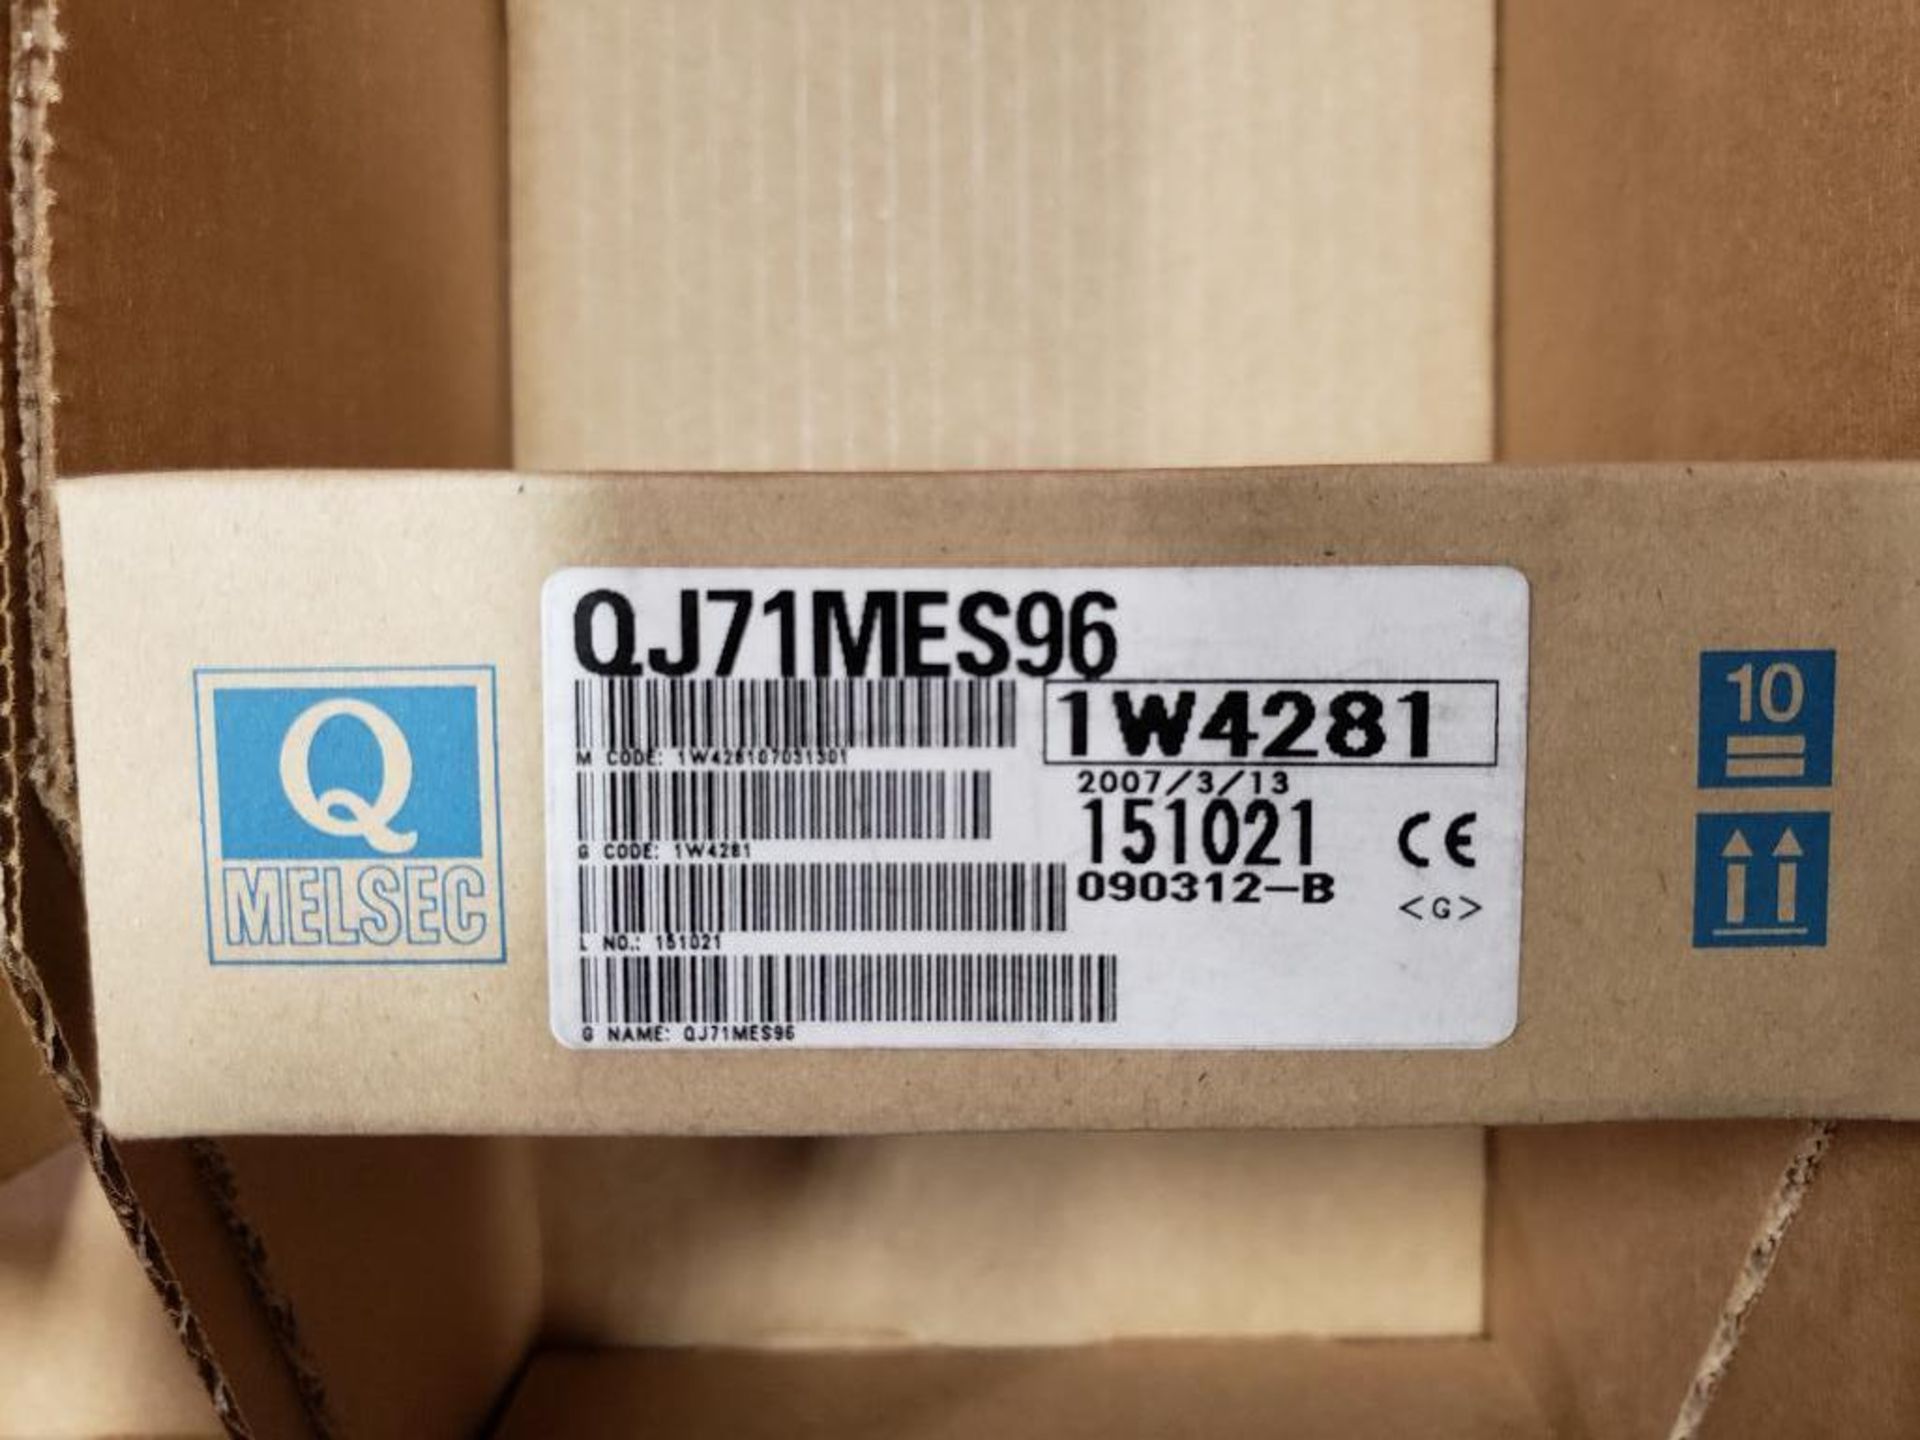 Mitsubishi MELSEC-Q QJ71MES96 programmable controller. New in box. - Image 3 of 4